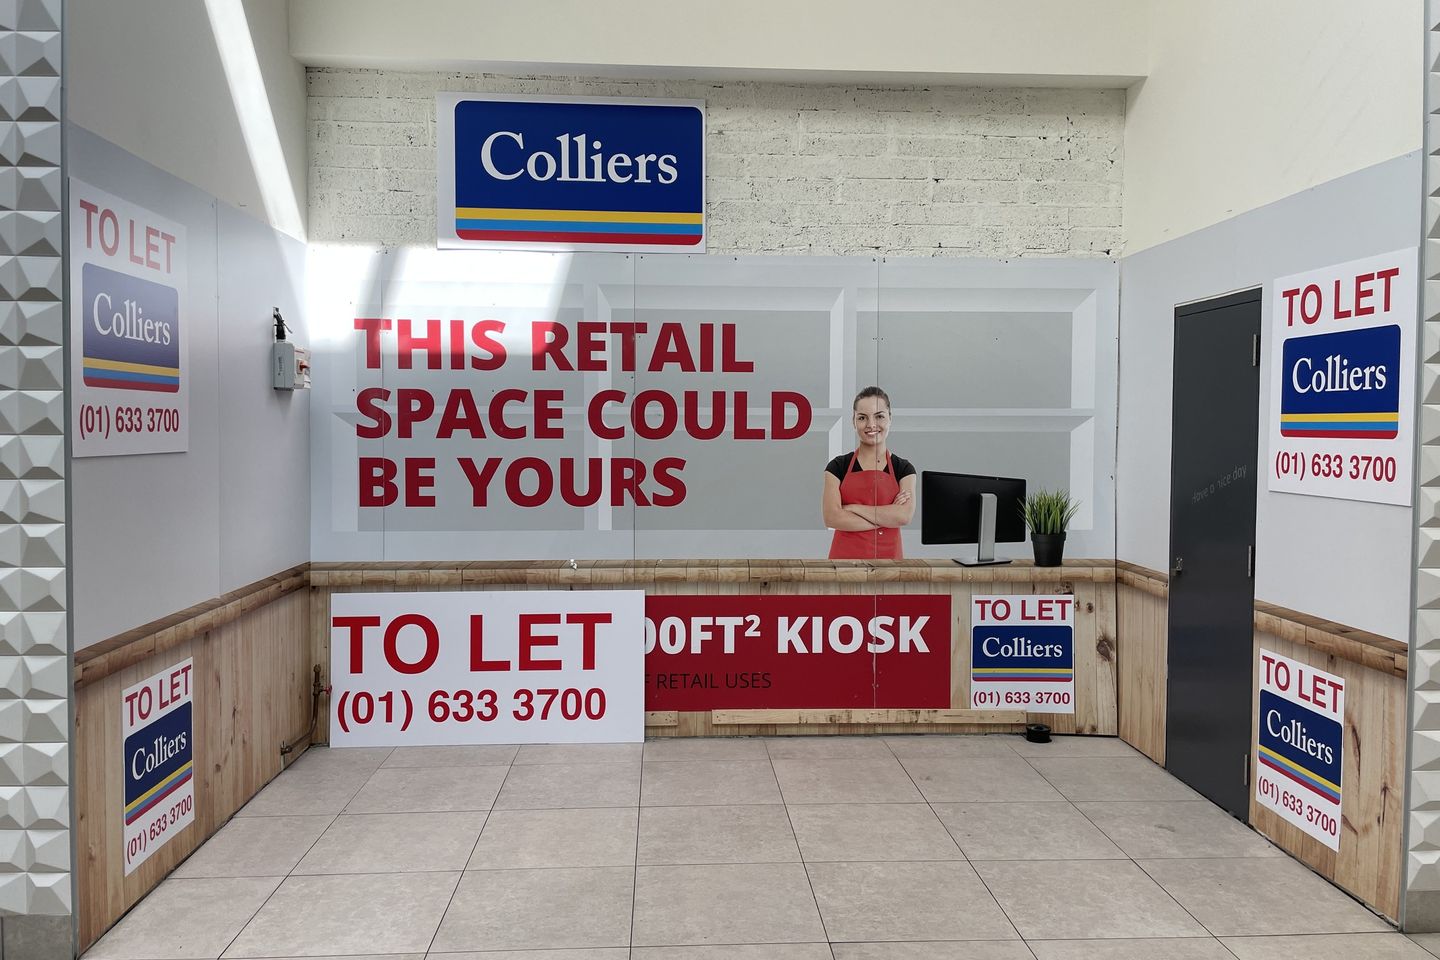 Unit 232, Eyre Square Shopping Centre, Galway City, Co. Galway